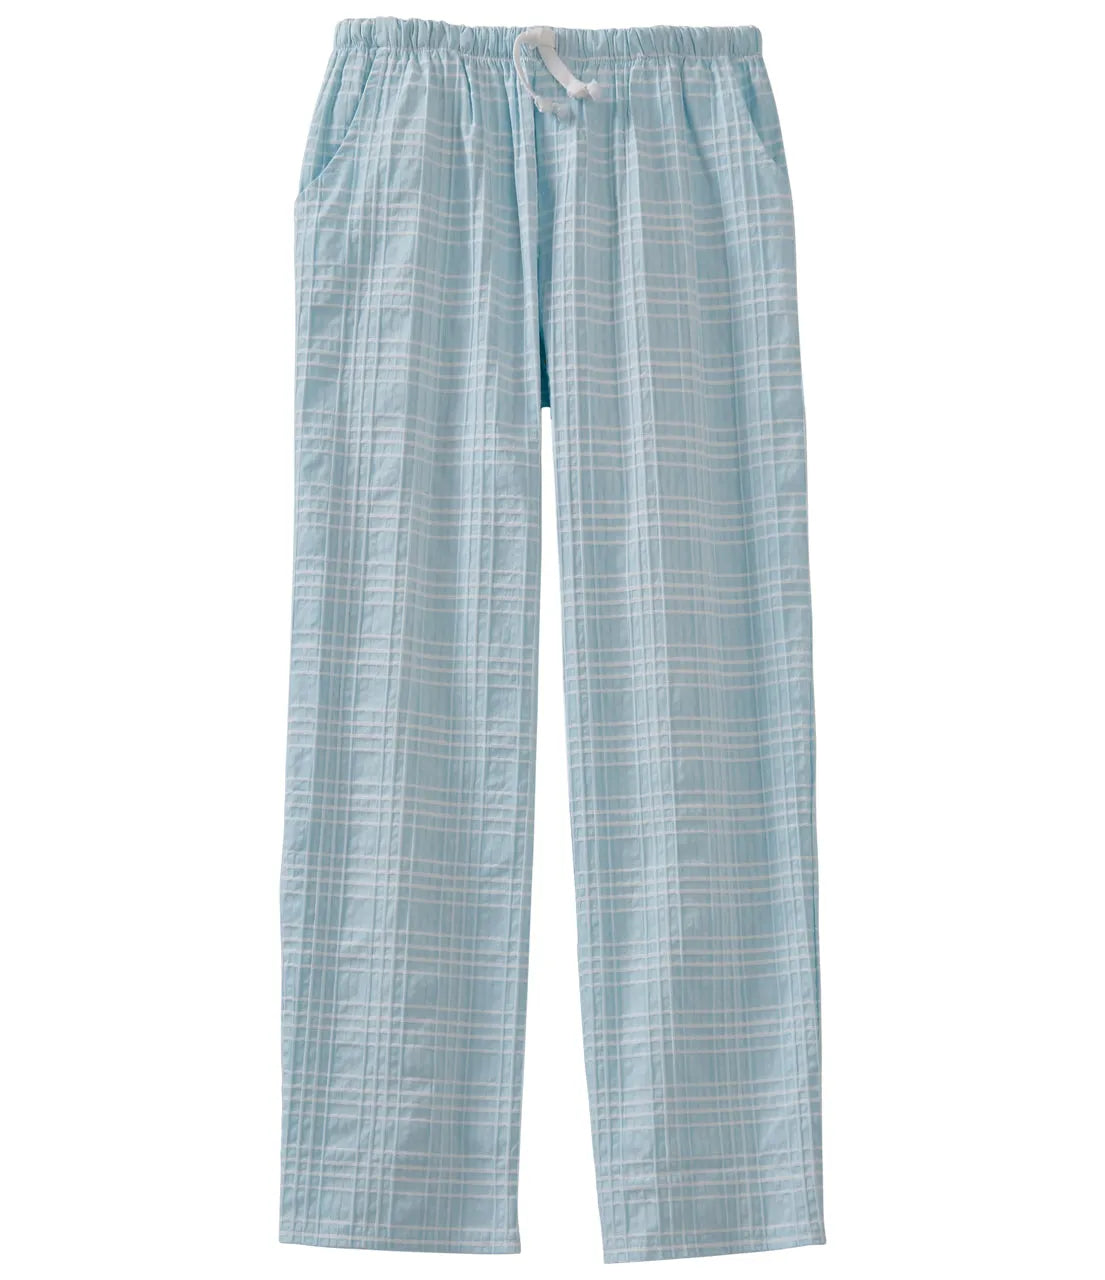 Flannel Lounge Pants  All American Clothing - All American Clothing Co